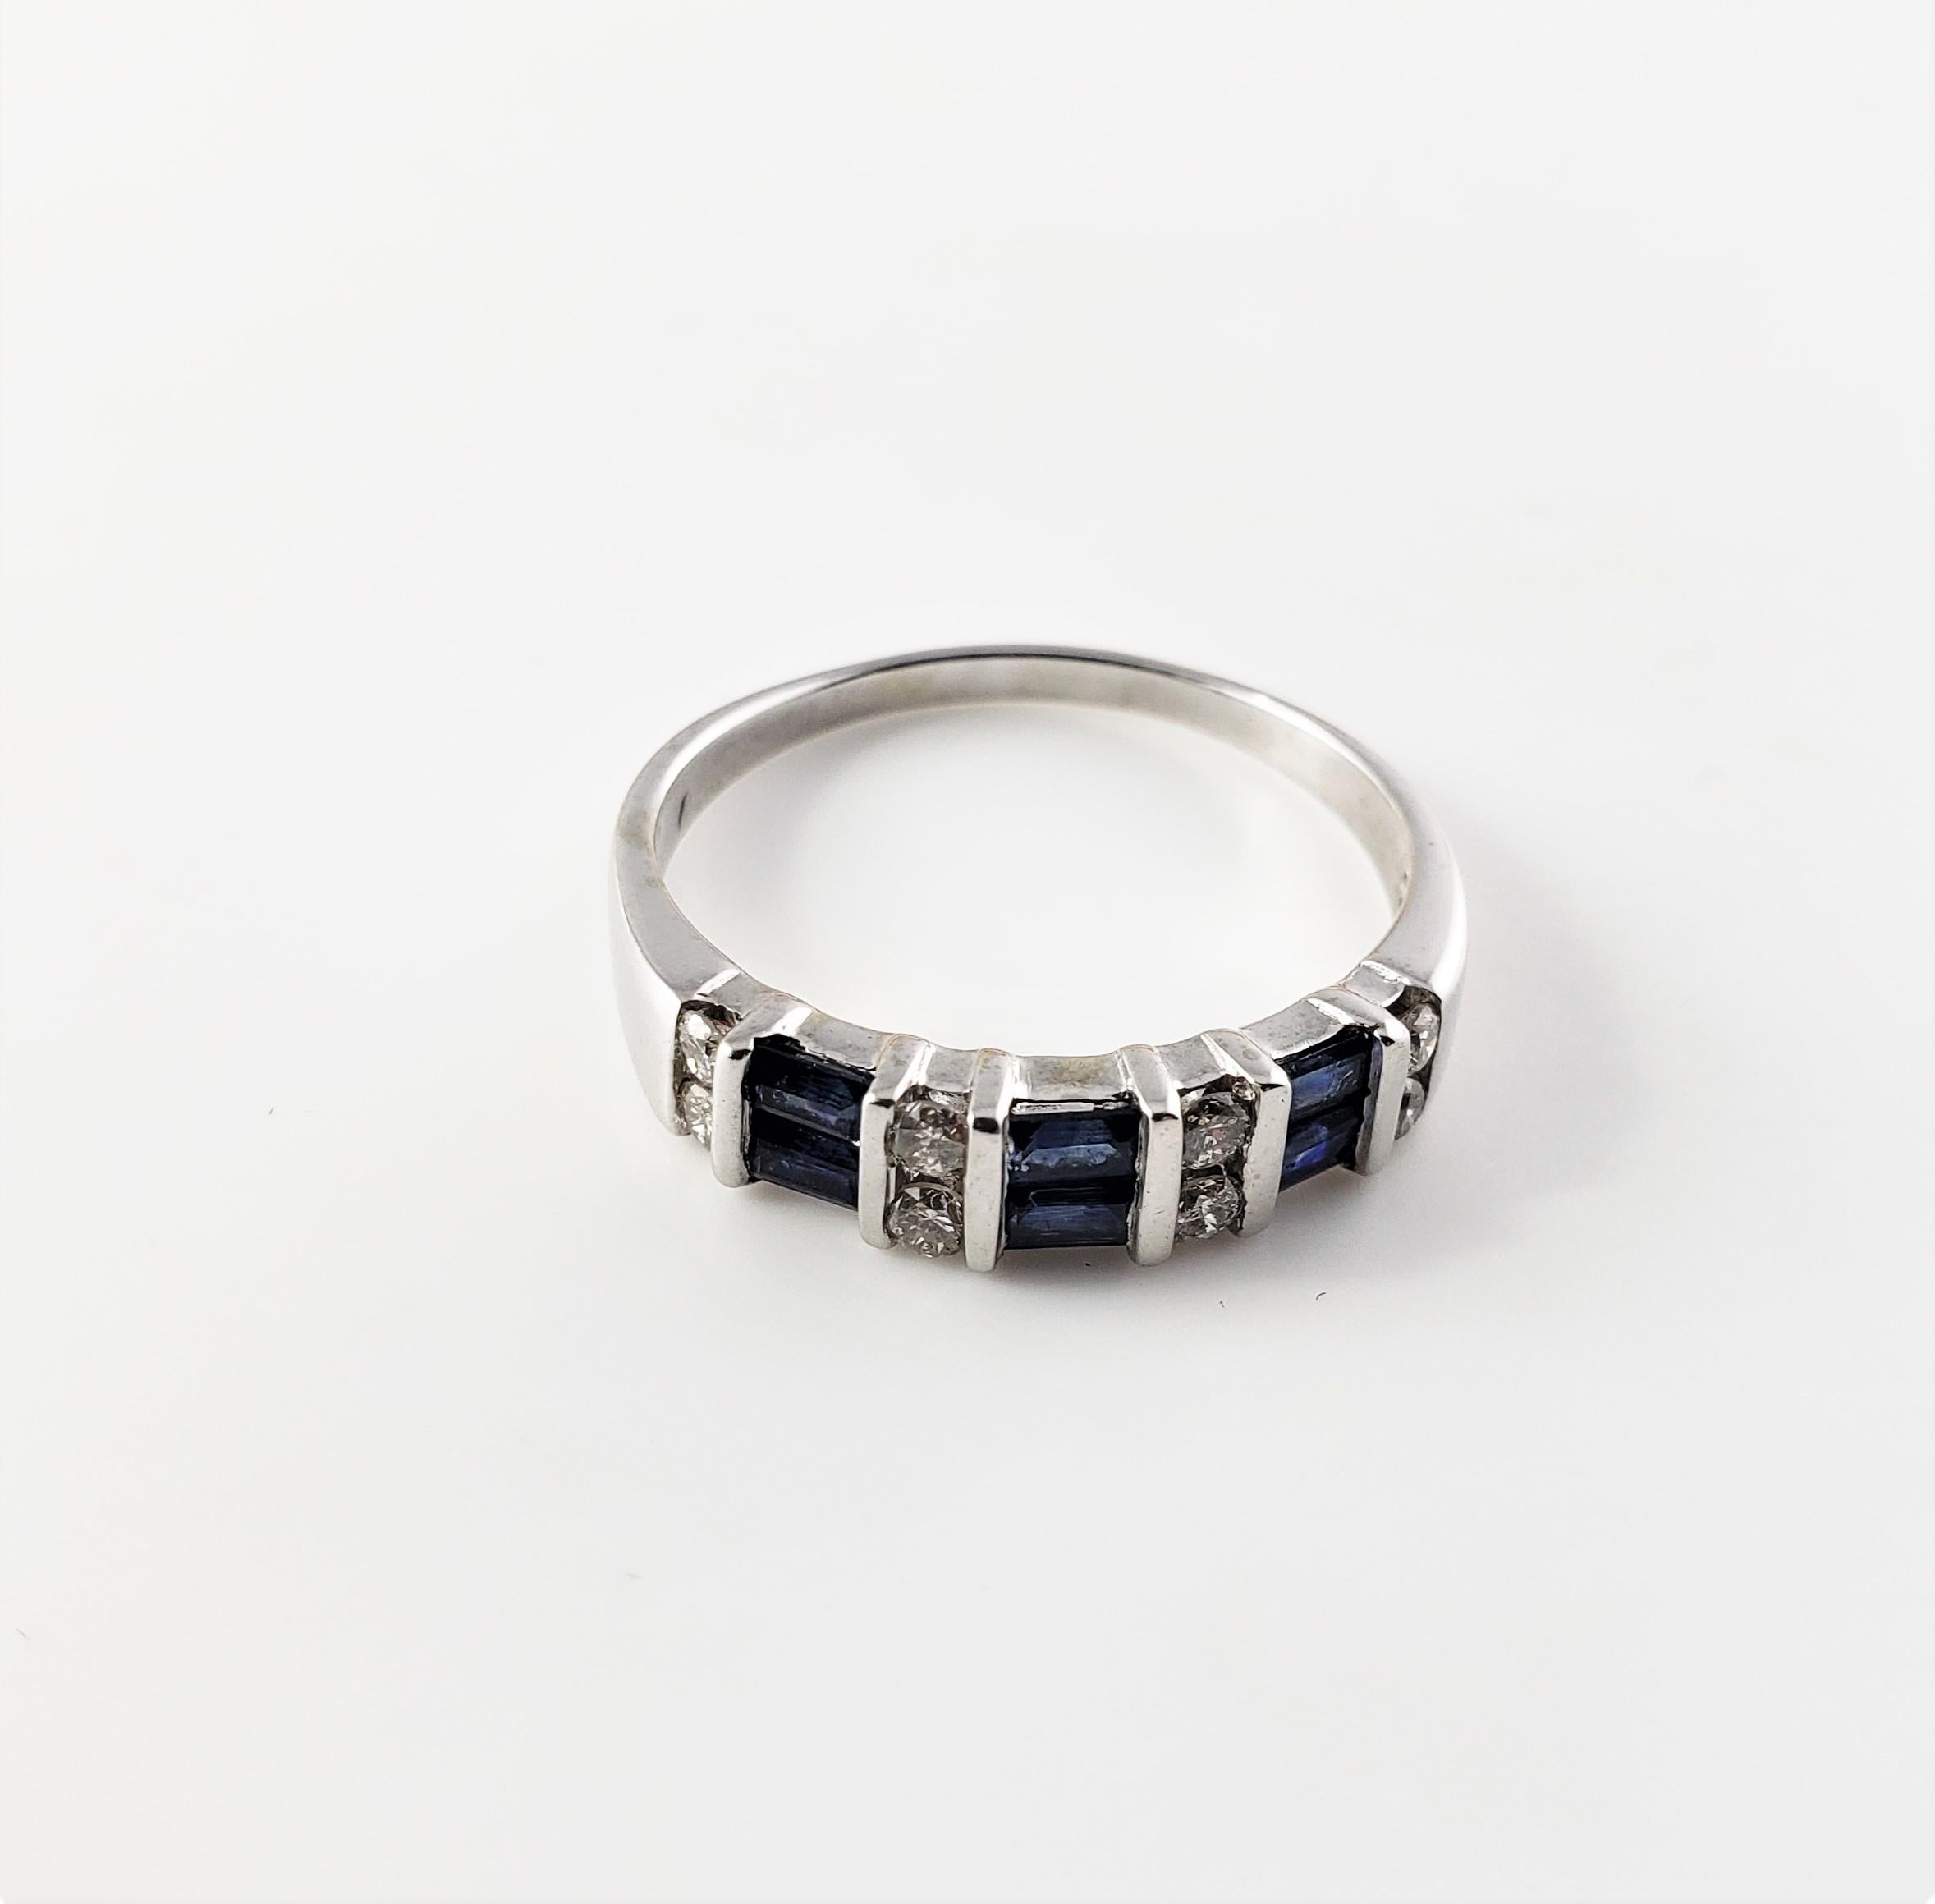 14 Karat White Gold Sapphire and Diamond Ring Size 9.25-

This lovely ring features six baguette sapphires and eight round brilliant cut diamonds set in classic 14K white gold.  Width:  4 mm.  Shank:  2 mm.

Approximate total diamond weight:  .20